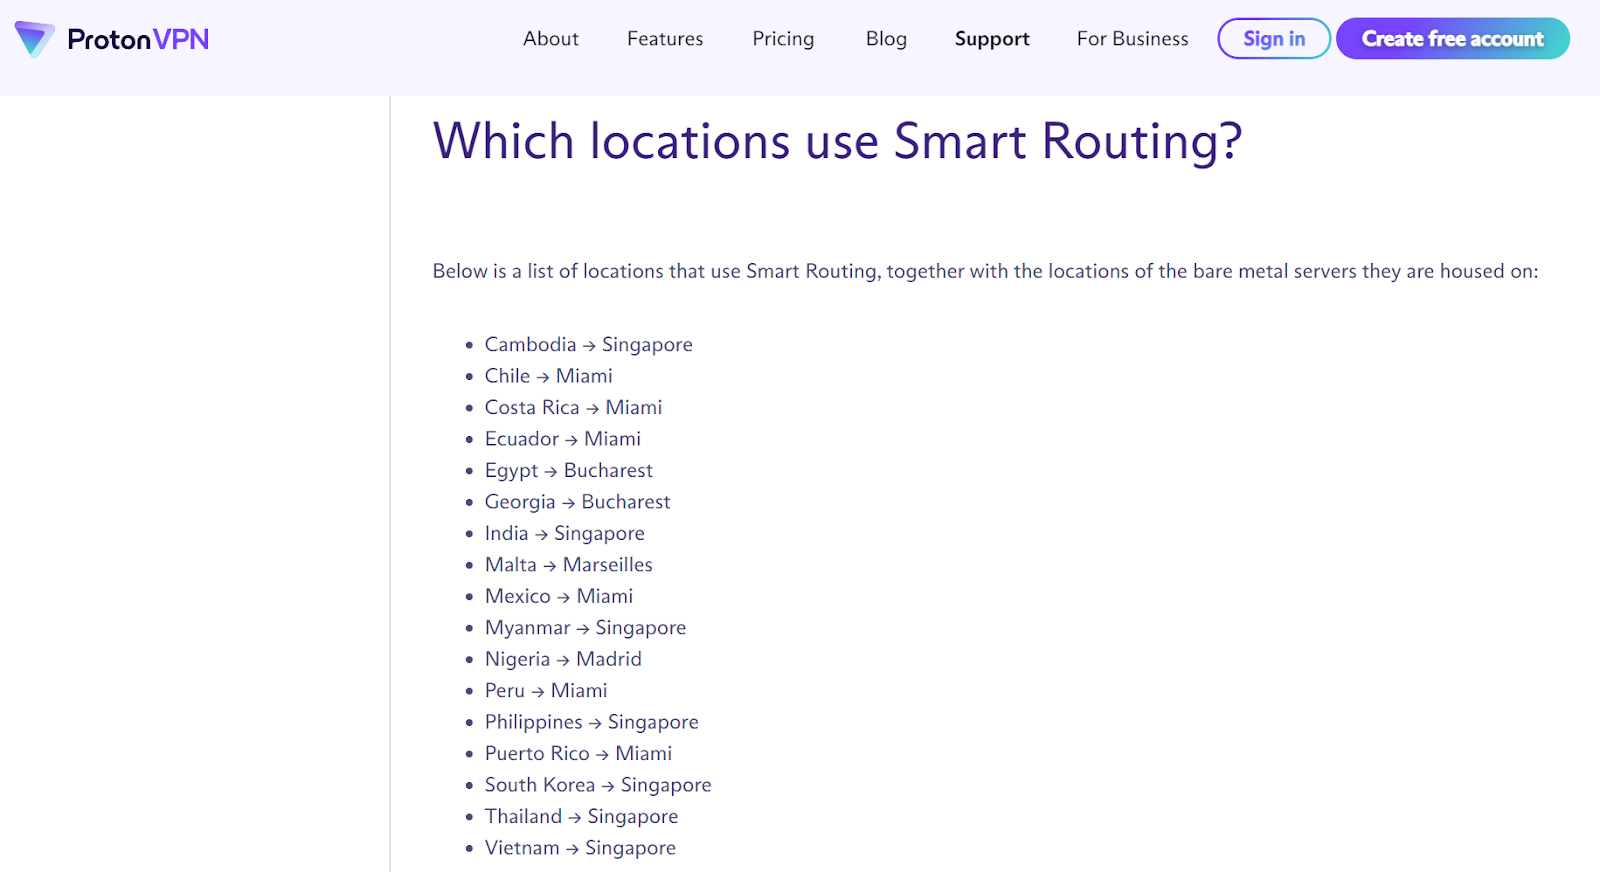 Screenshot of ProtonVPNs locations that use Smart Routing